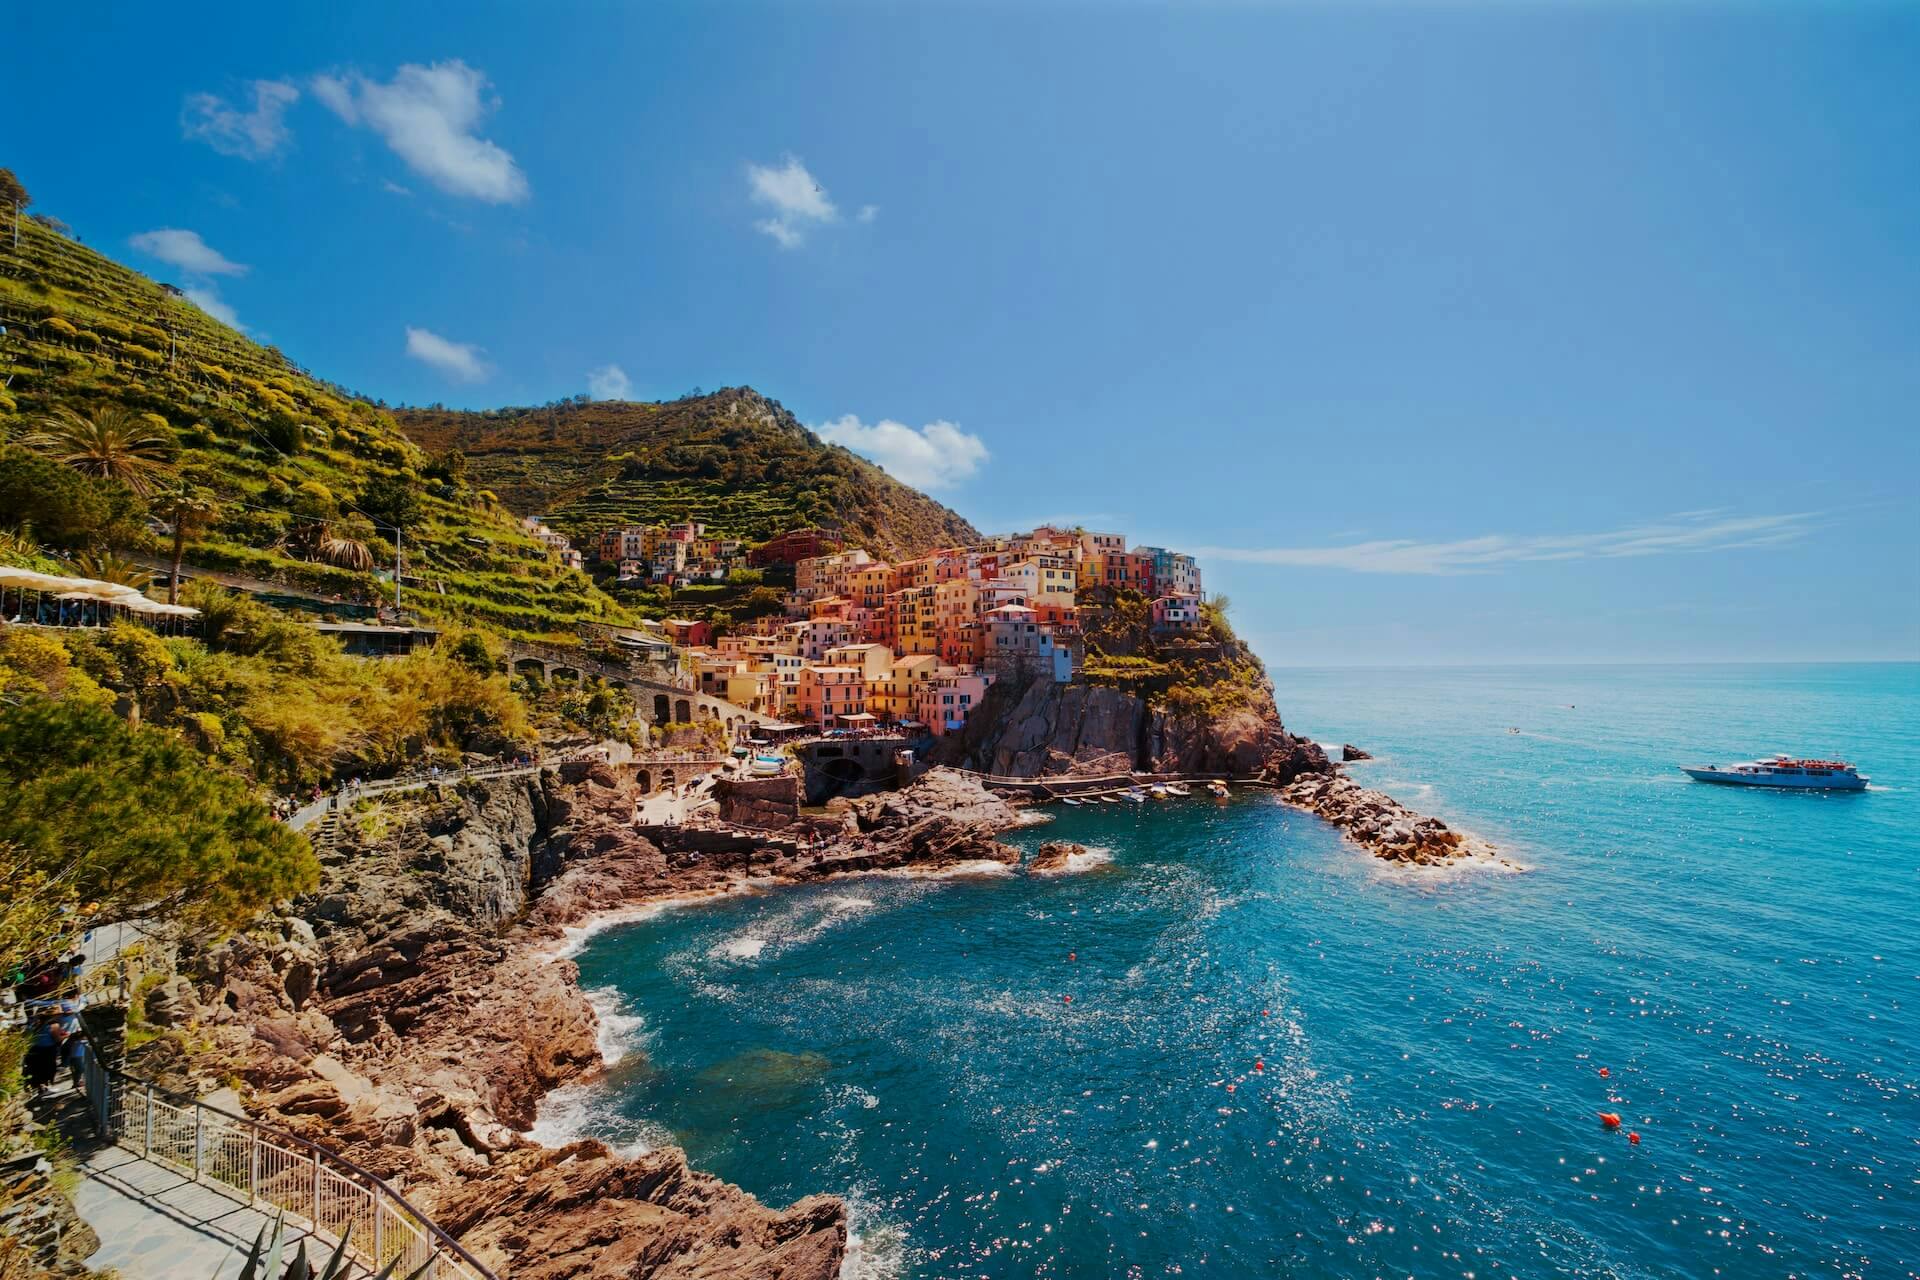 a view of a village on a cliff overlooking the ocean